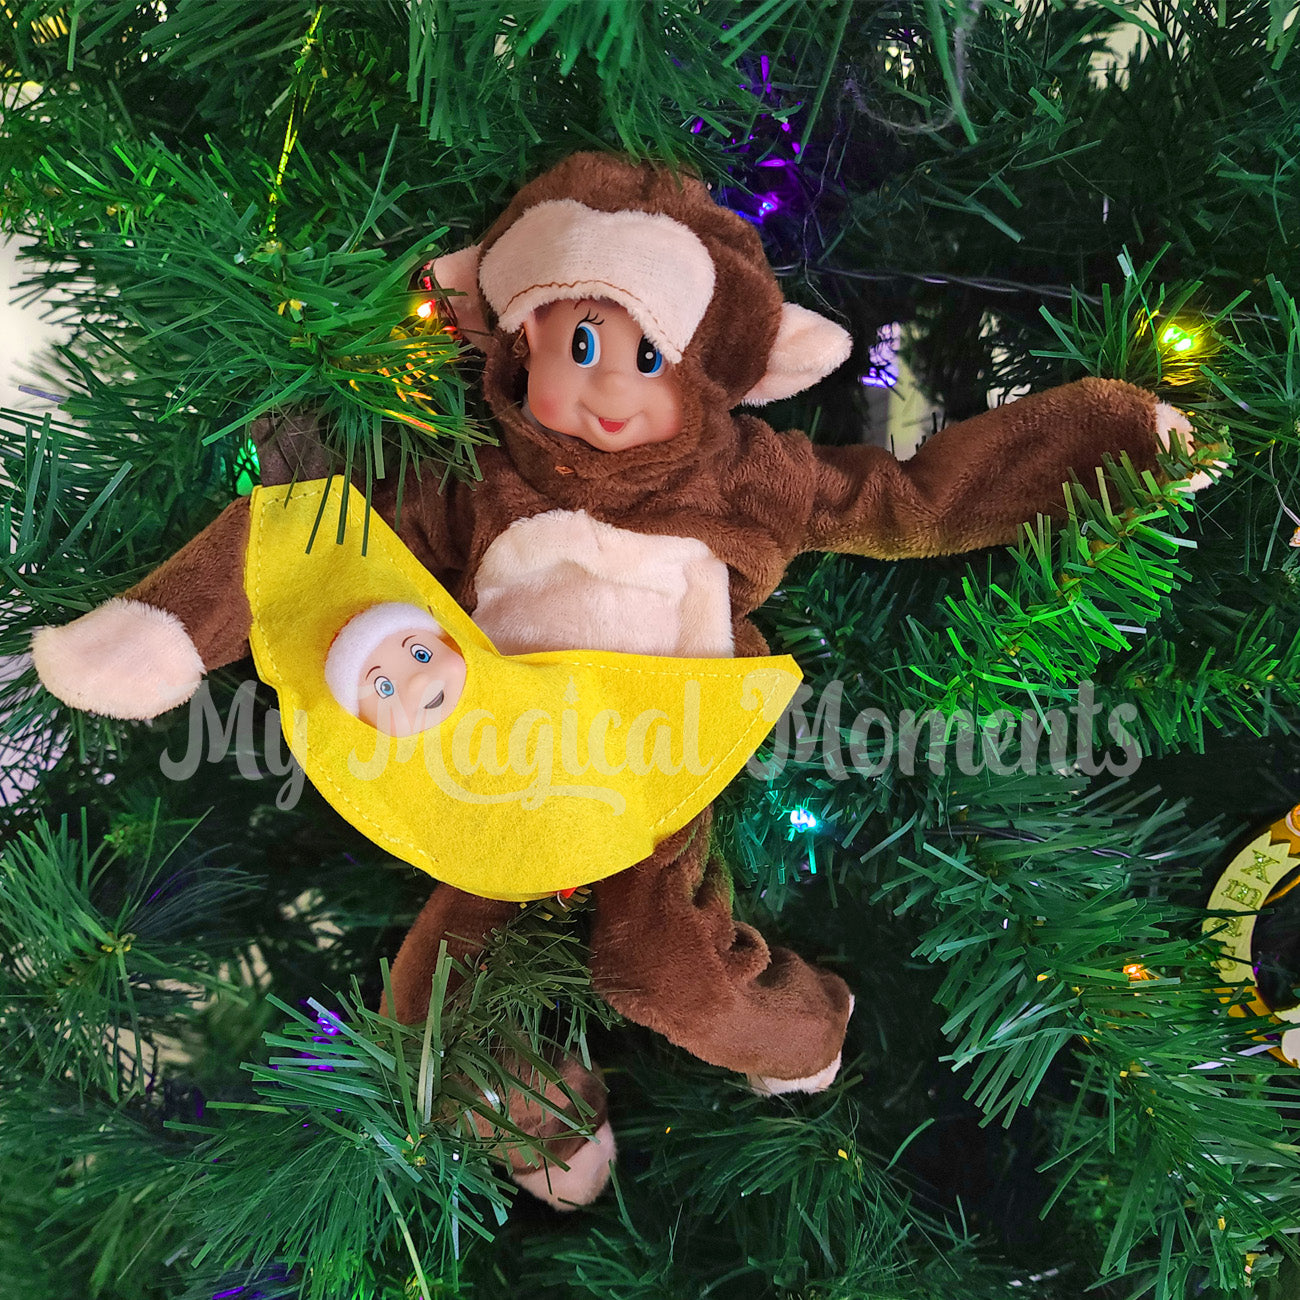 Elf dressed as a monkey in a christmas tree holding a baby elf dressed in a banana costume